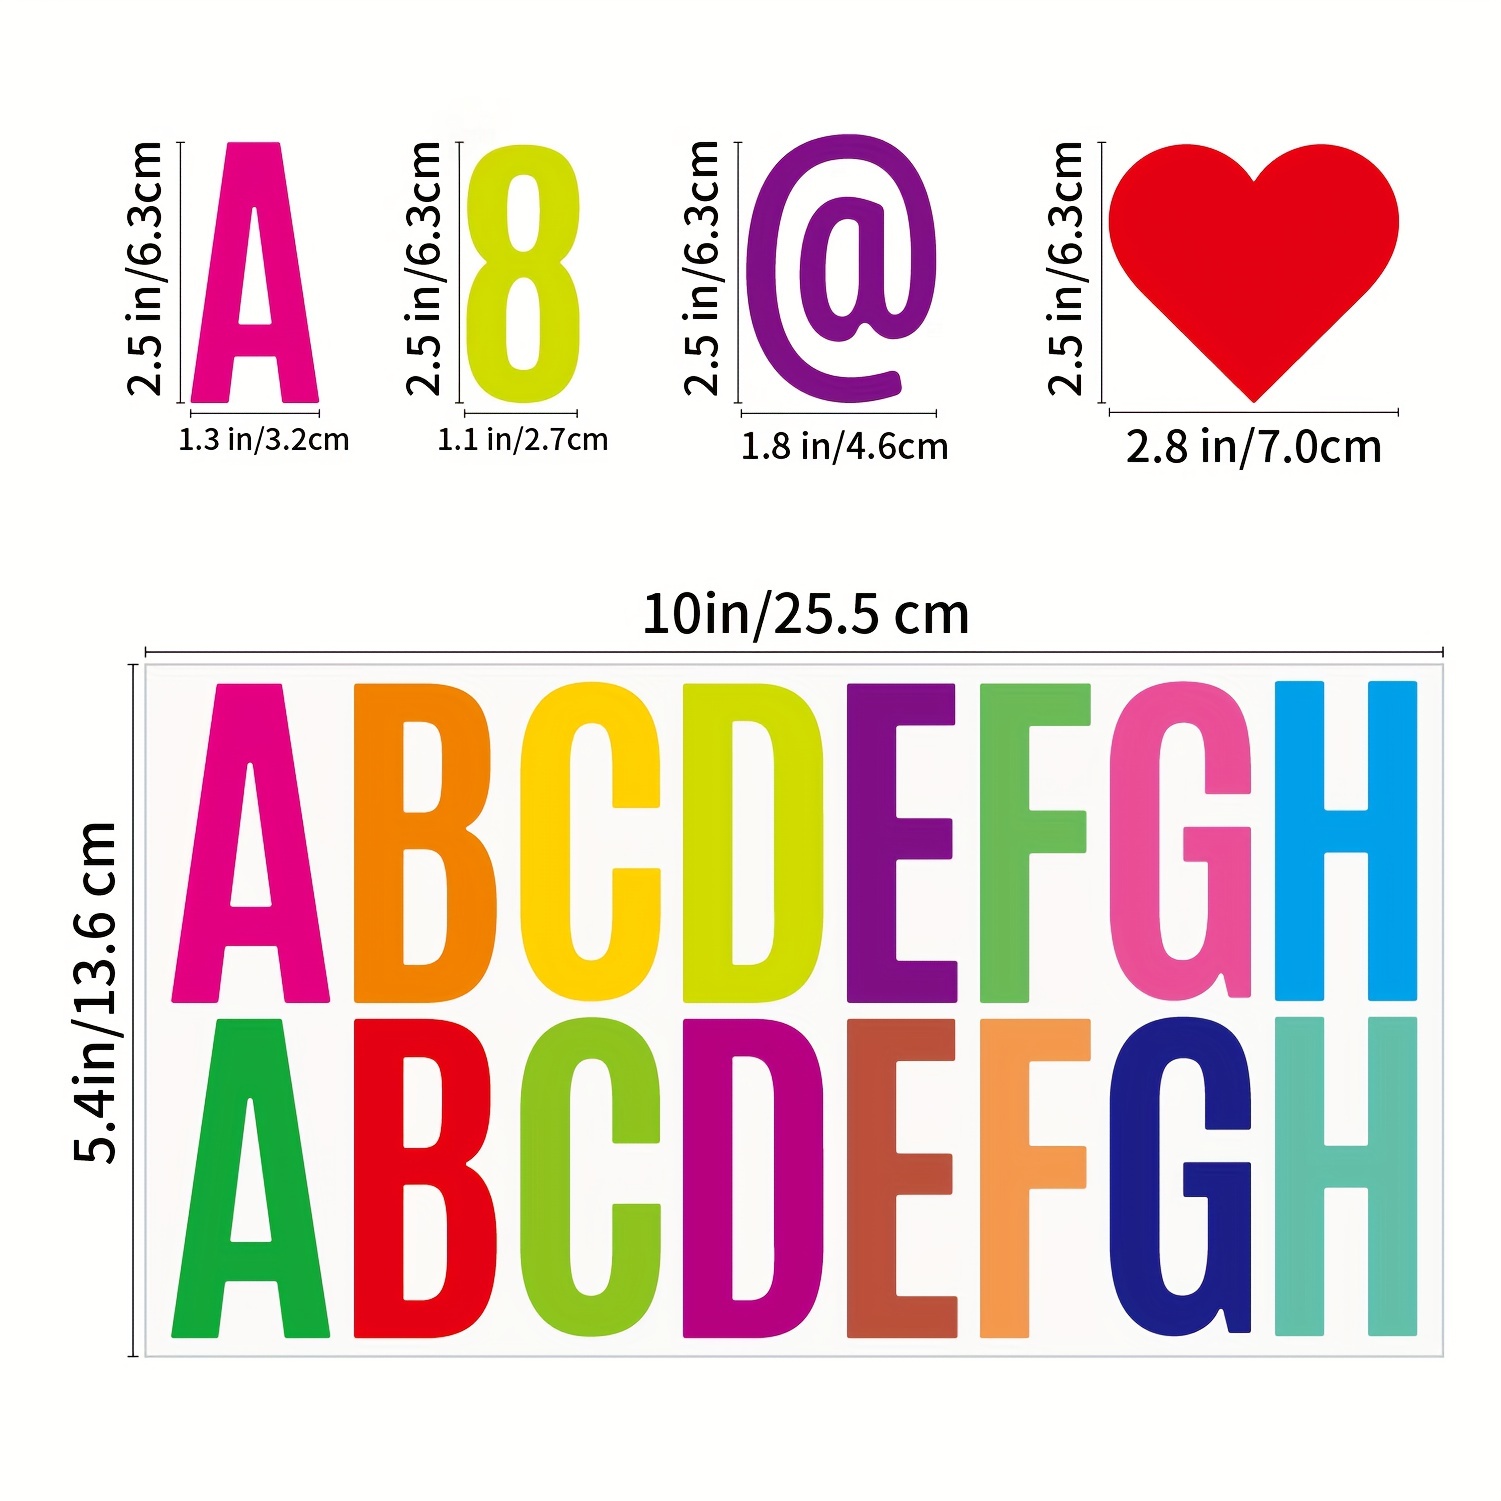 6 Sheets Large Letter Stickers 2.5 Inches Boho Alphabet Number Self  Adhesive Sticker for Bulletin Board, Classrooms, Mailbox,Poster board Vinyl  Stick